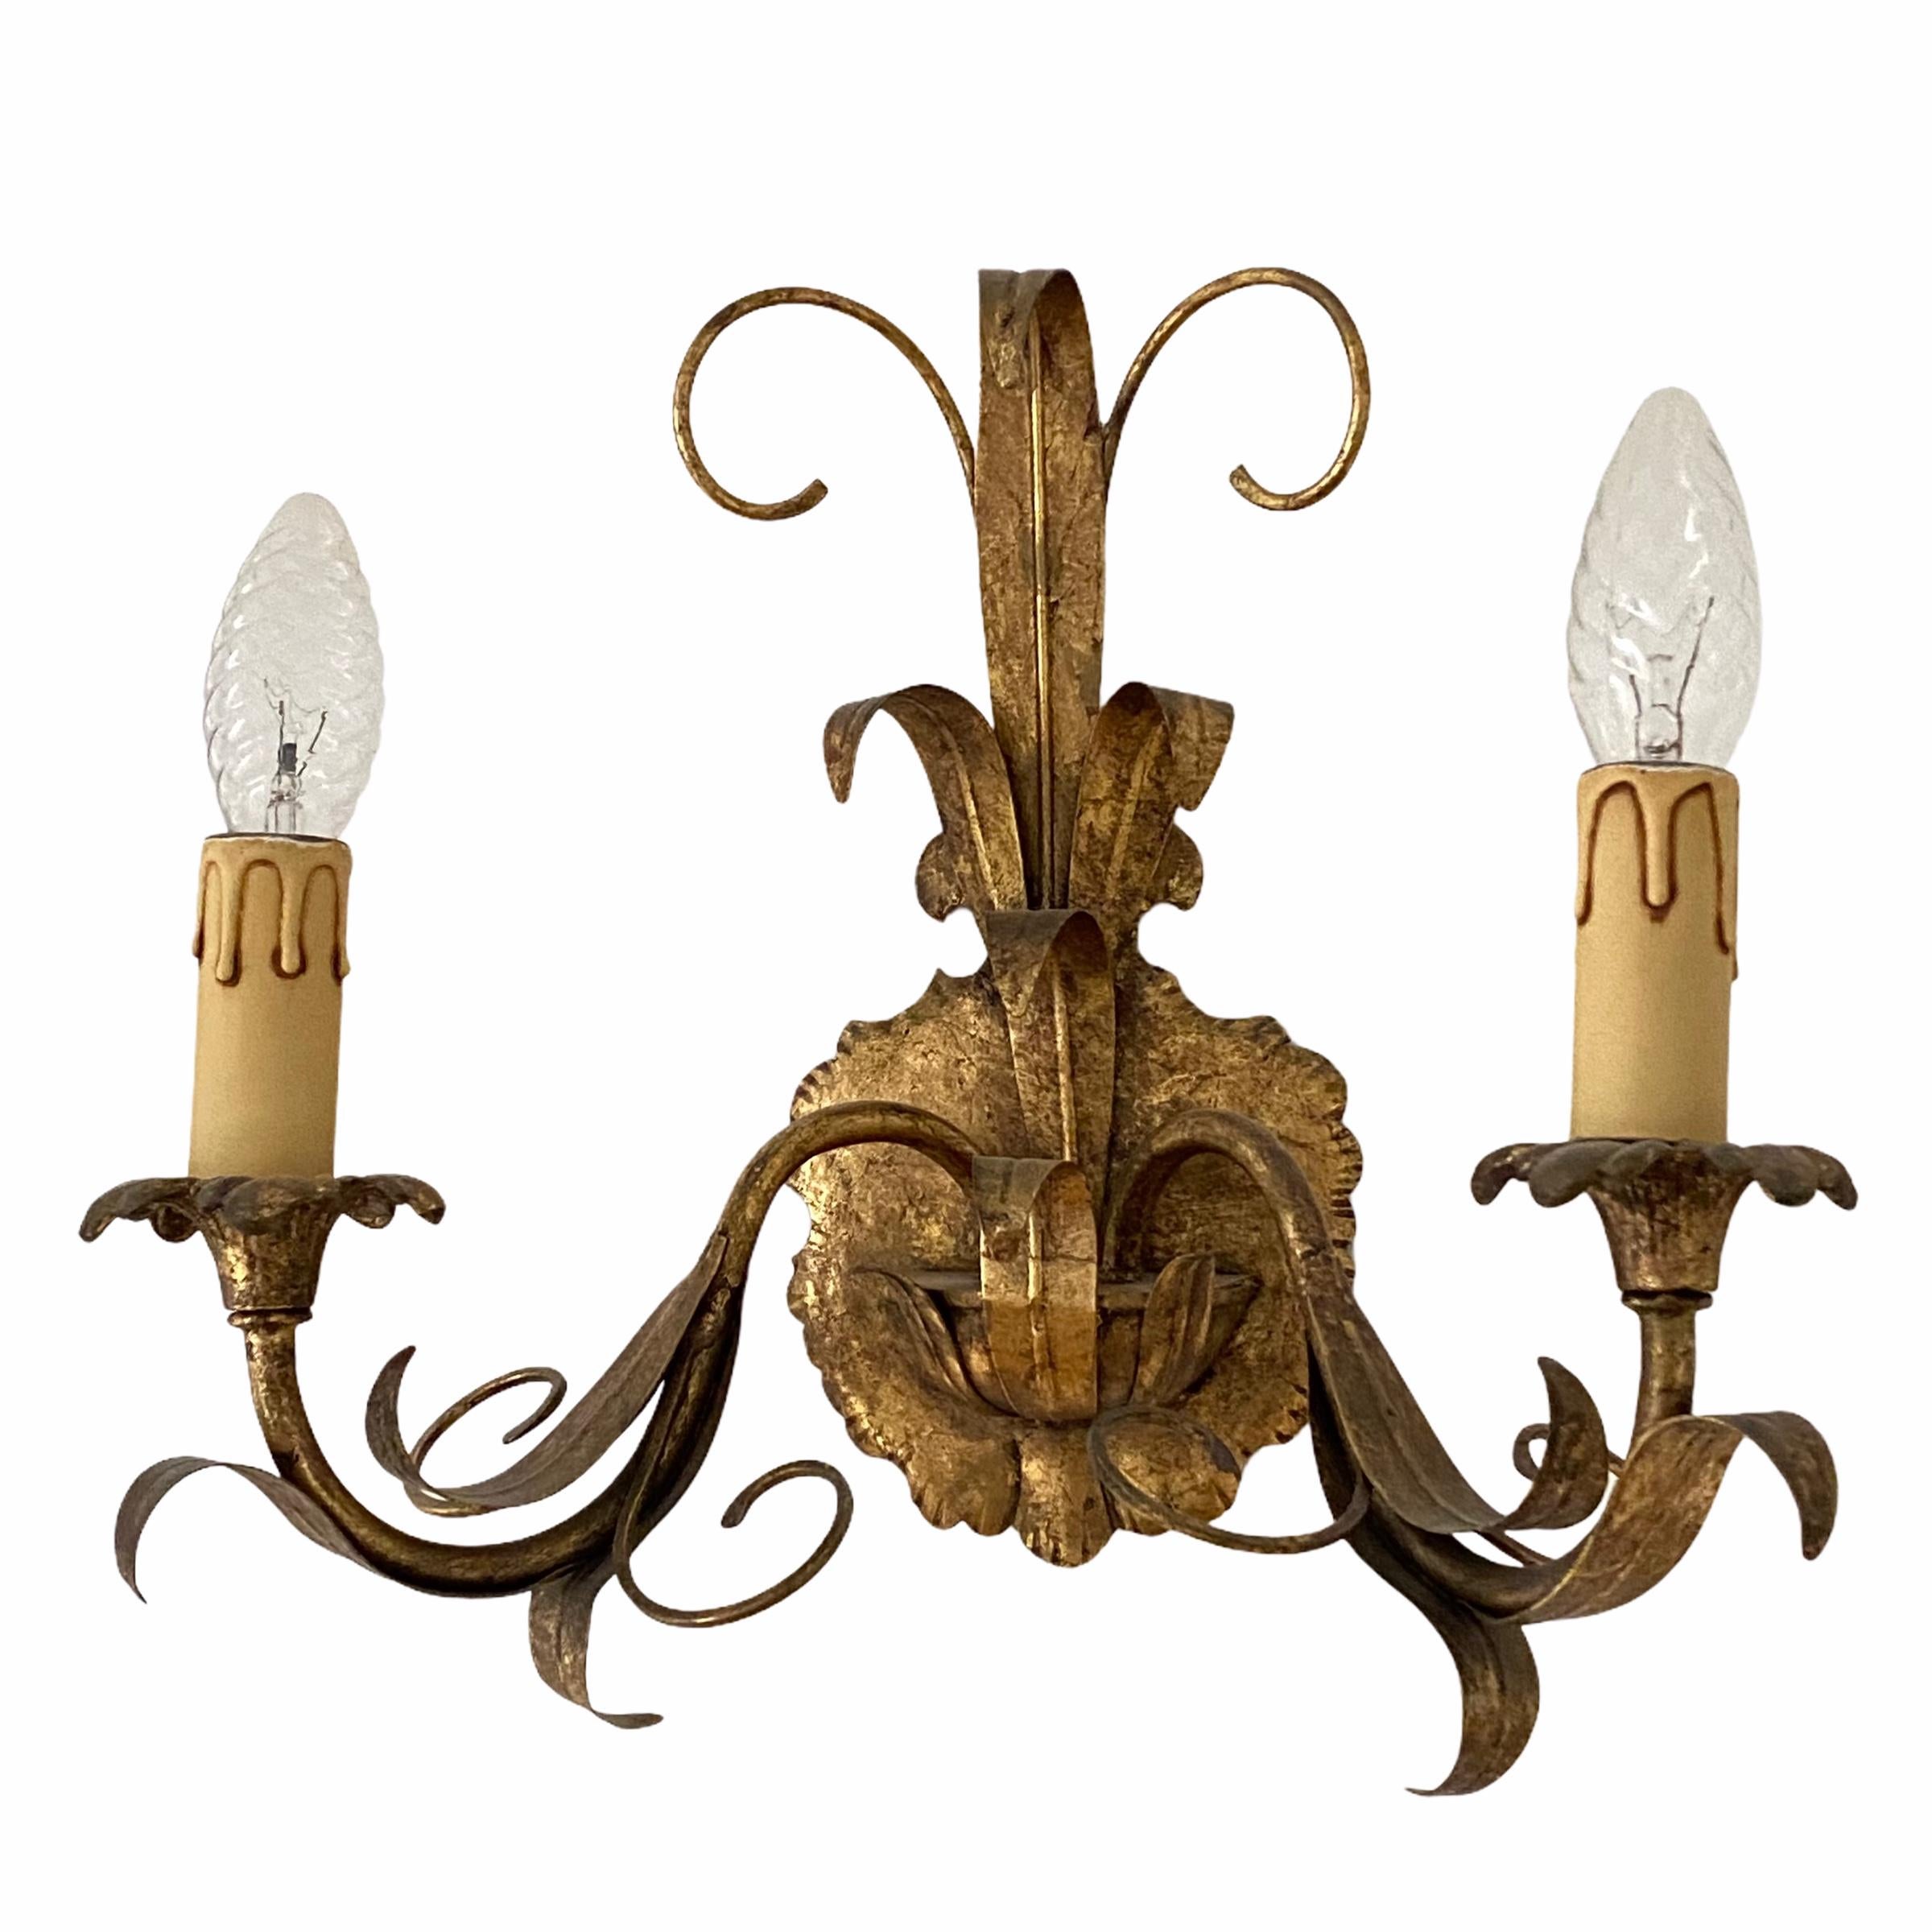 This offer is for one of the shown sconces. Each fixture requires two European E14 candelabra bulbs, each bulb up to 40 watts. The wall light has a beautiful color and gives each room an eclectic statement. Light bulbs are not included in this